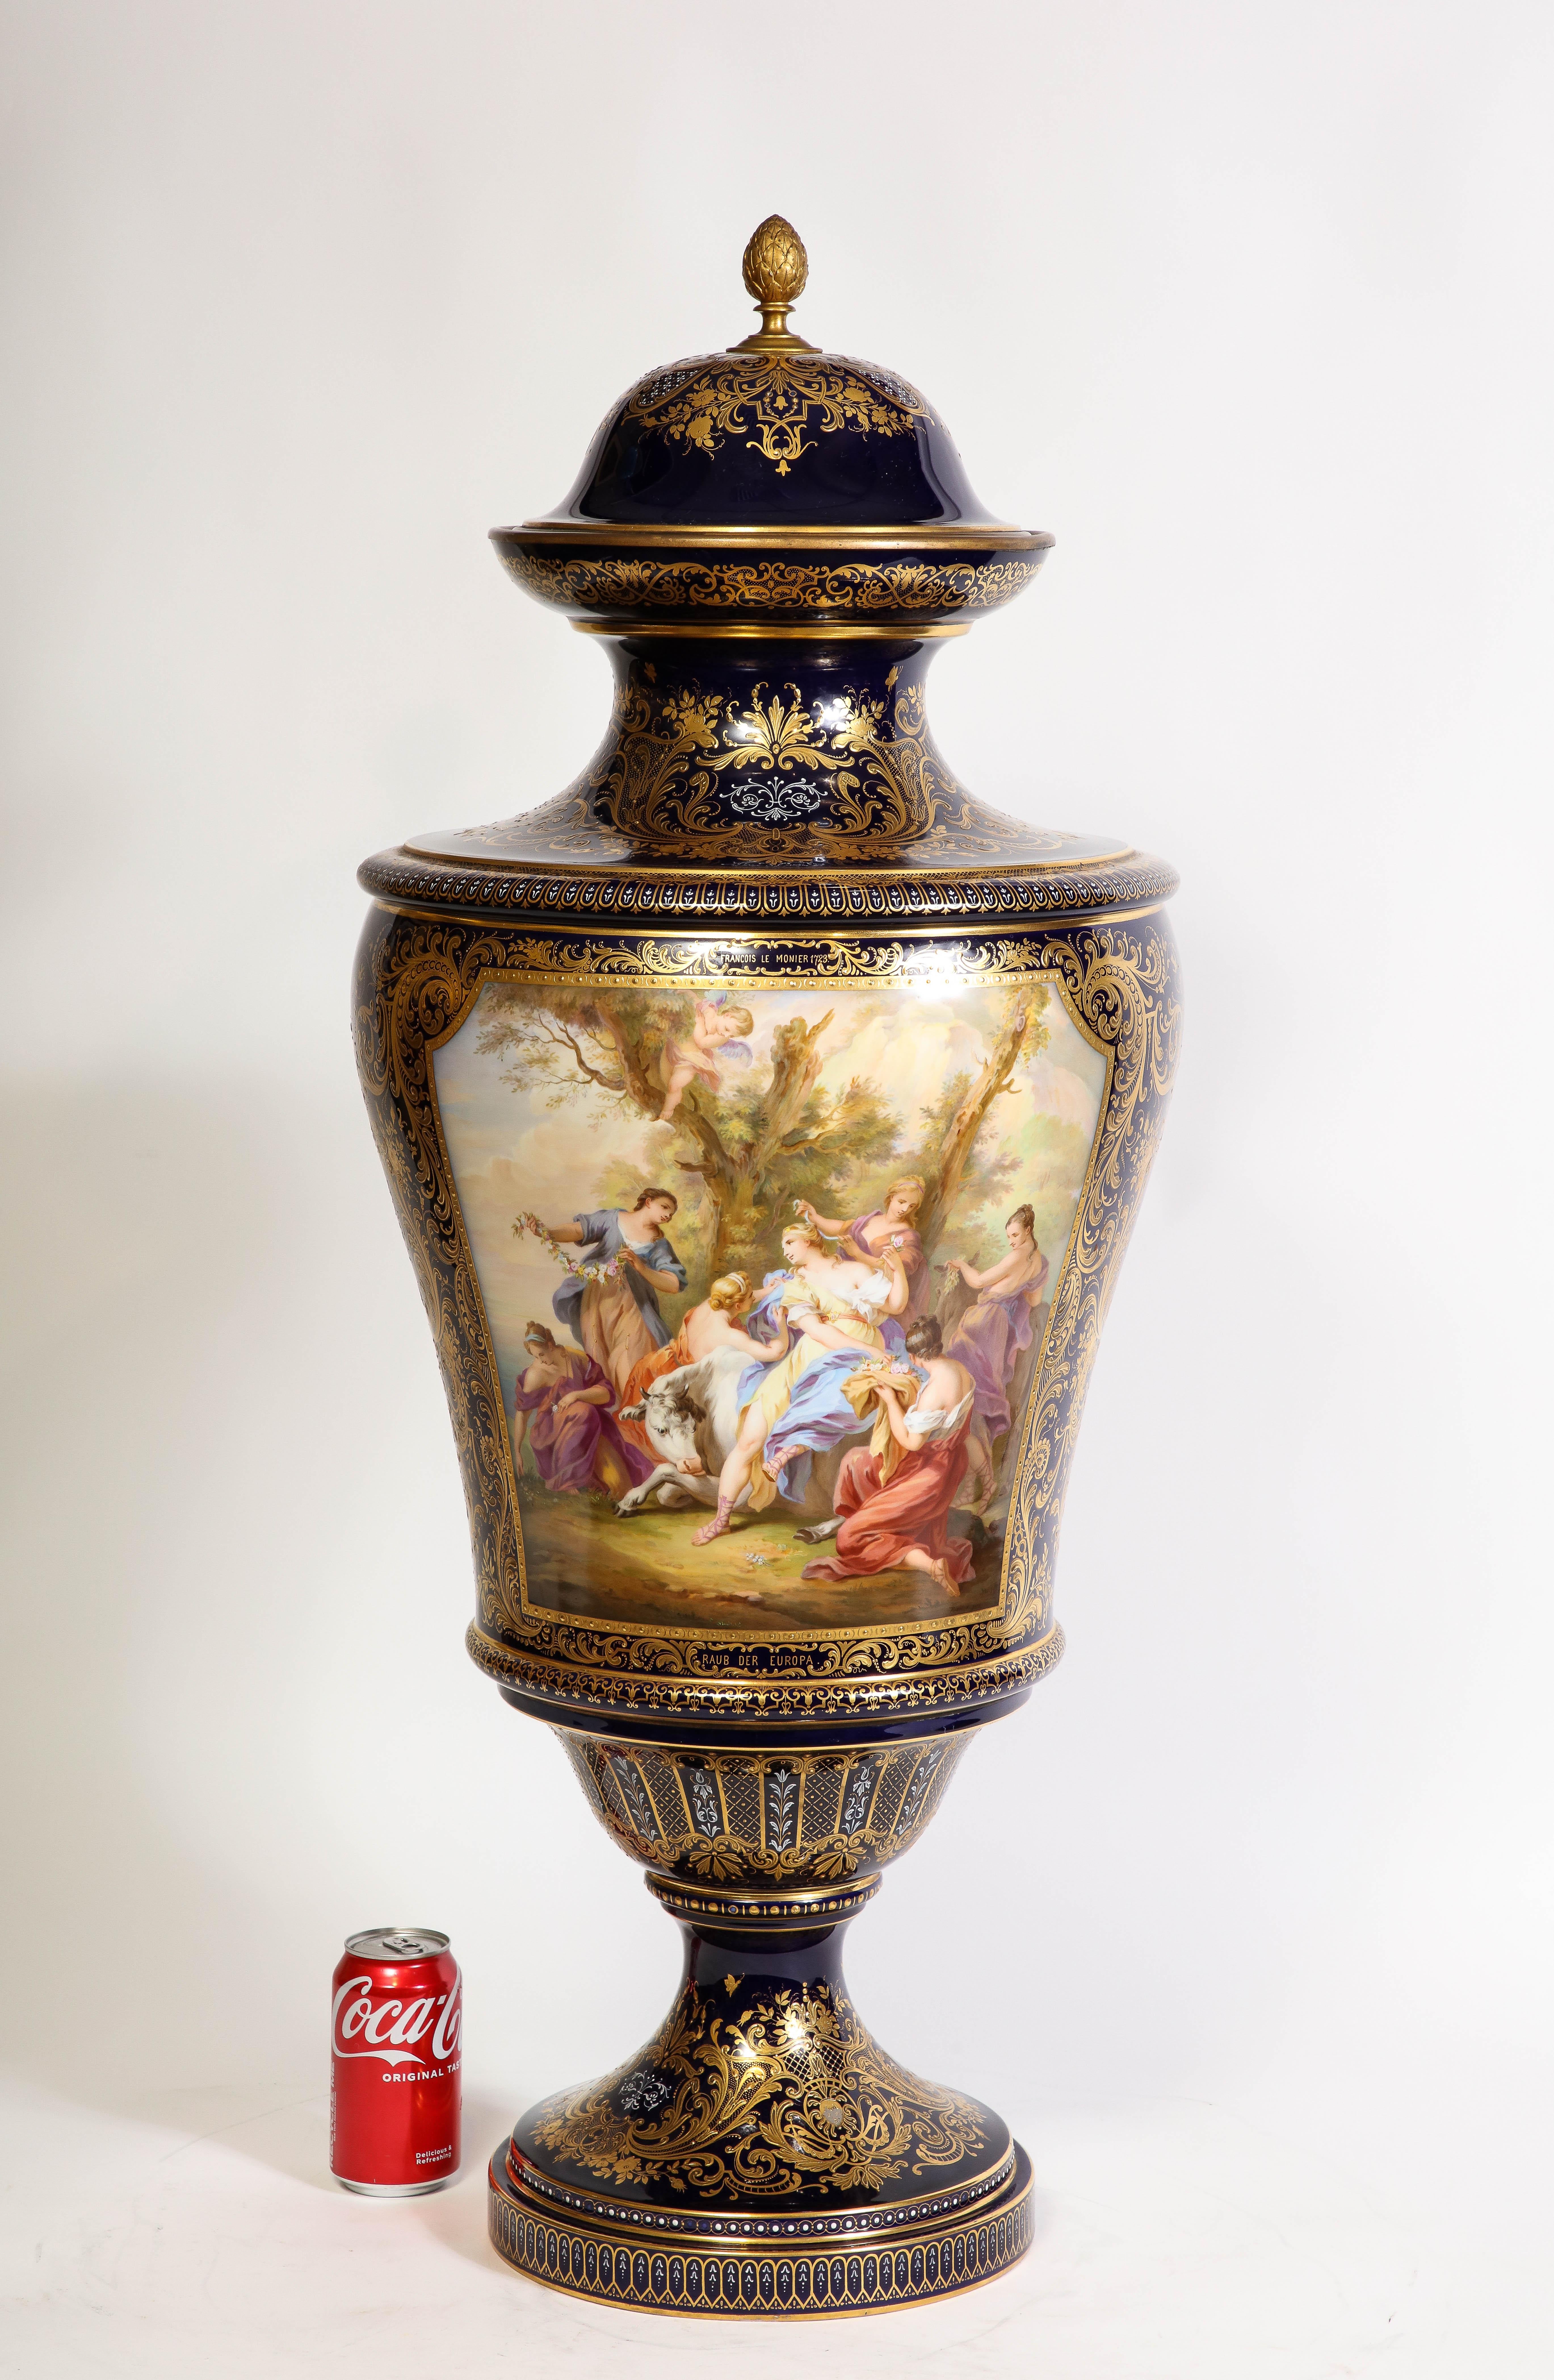 A 19th Century Monumental Cobalt Blue Ground Royal Vienna Porcelain Covered  Vase with Watteau Scenes.  Marvel at the sheer magnificence of this very large, Monumental Royal Blue Ground Royal Vienna Porcelain Covered Vase, an exquisite masterpiece